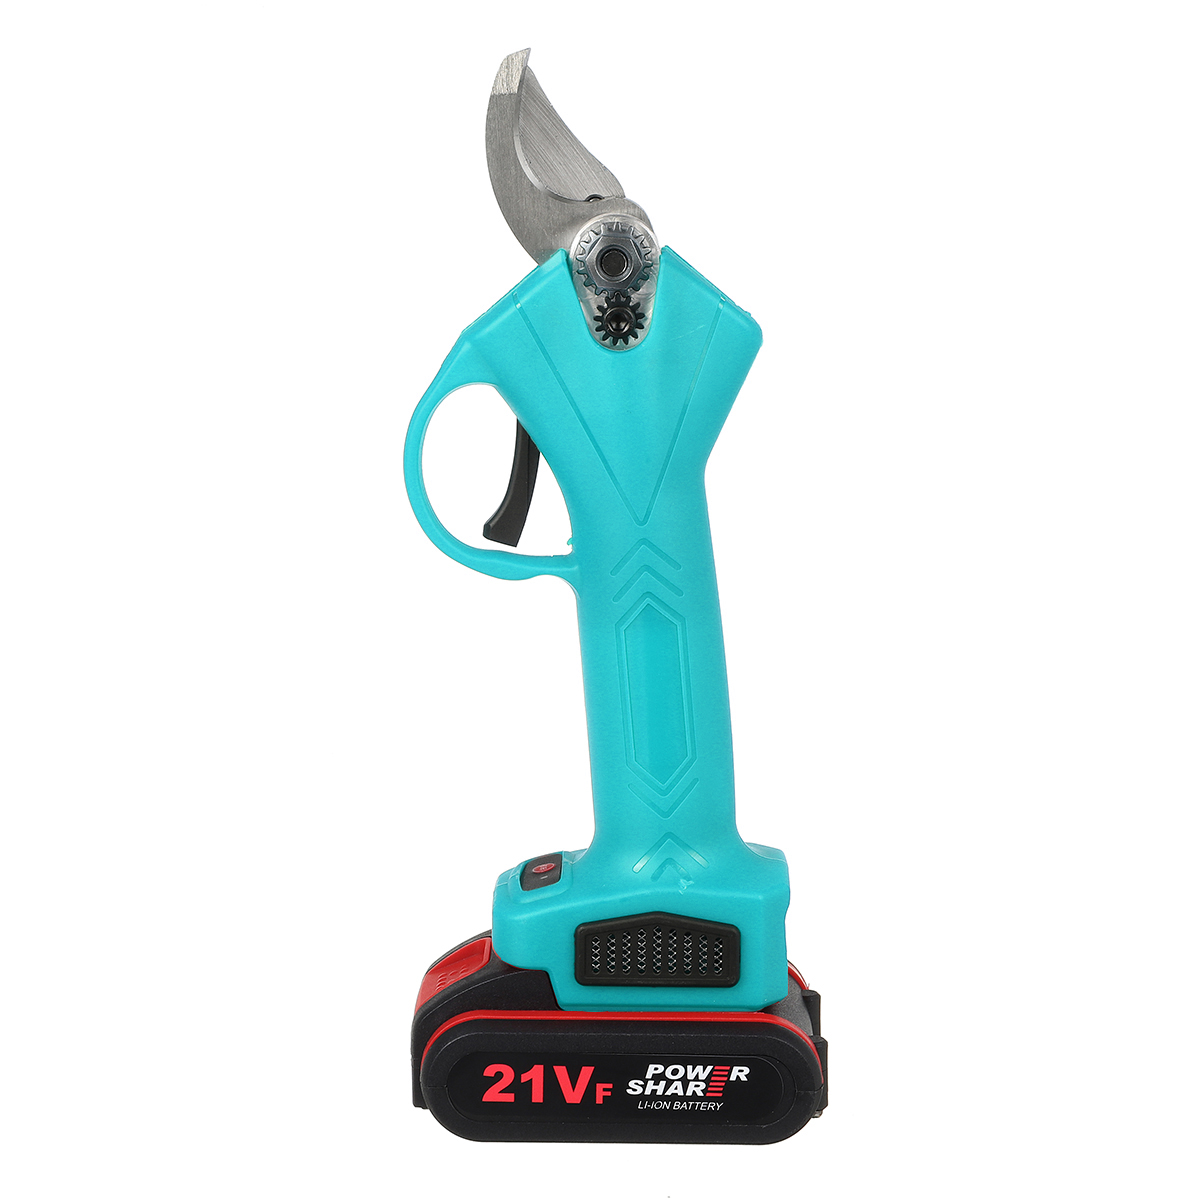 21V-Wireless-25mm-Rechargeable-Electric-Scissors-Branch-Pruning-Shear-Tree-Cutting-Tools-W-2-Battery-1749247-9